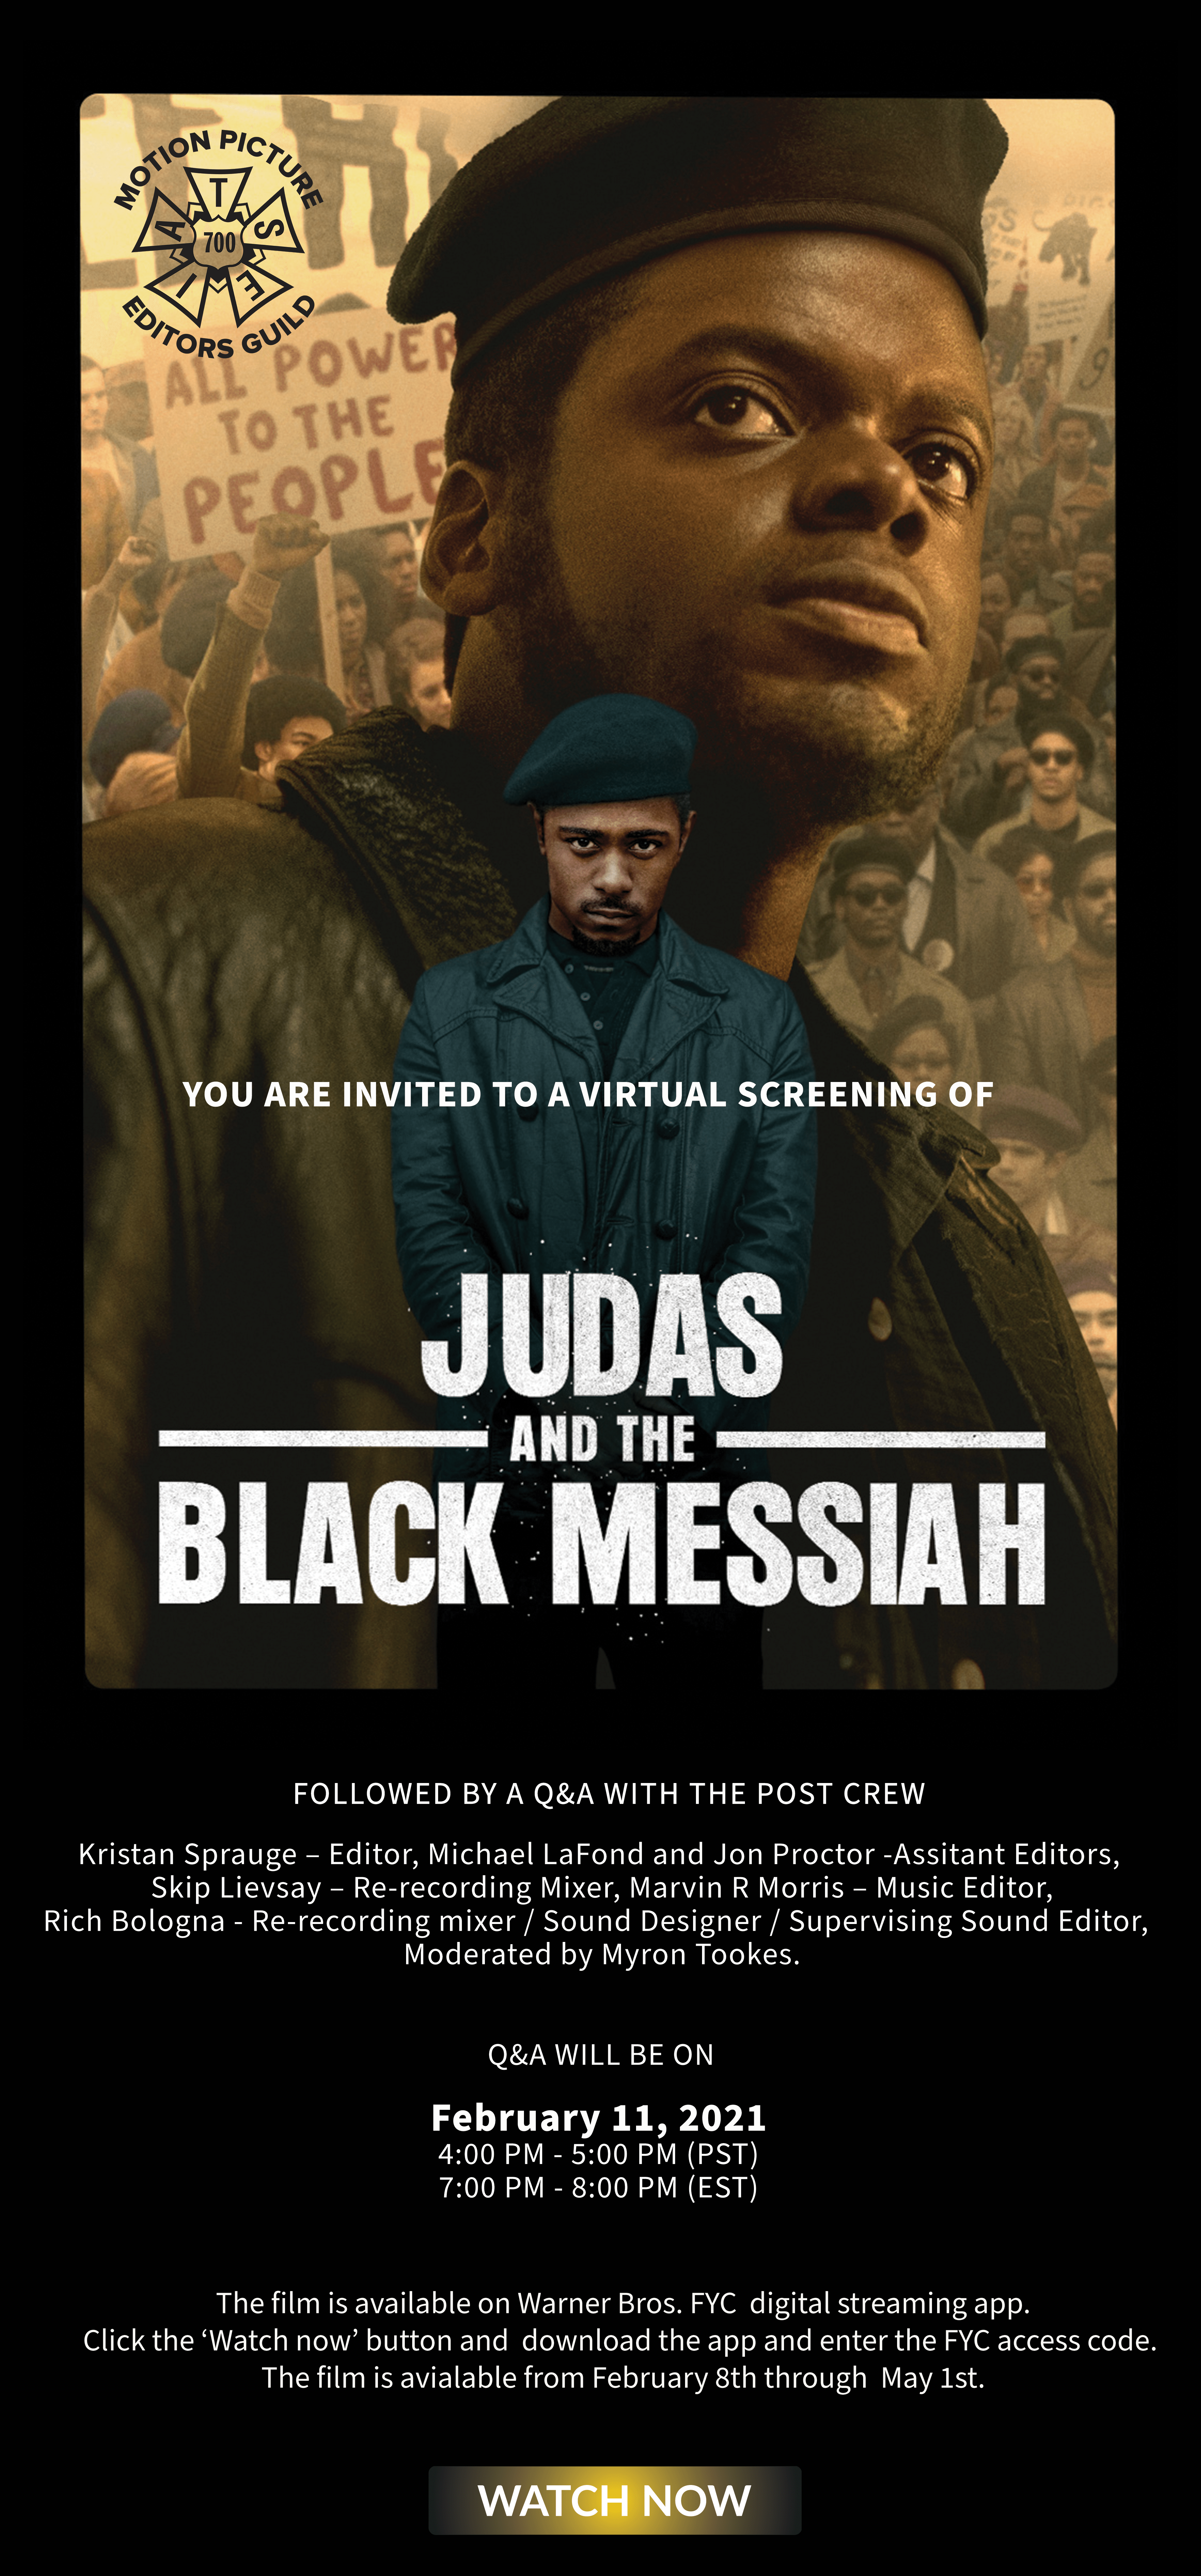 Judas And The Black Messiah quotes Poster by Pictandra